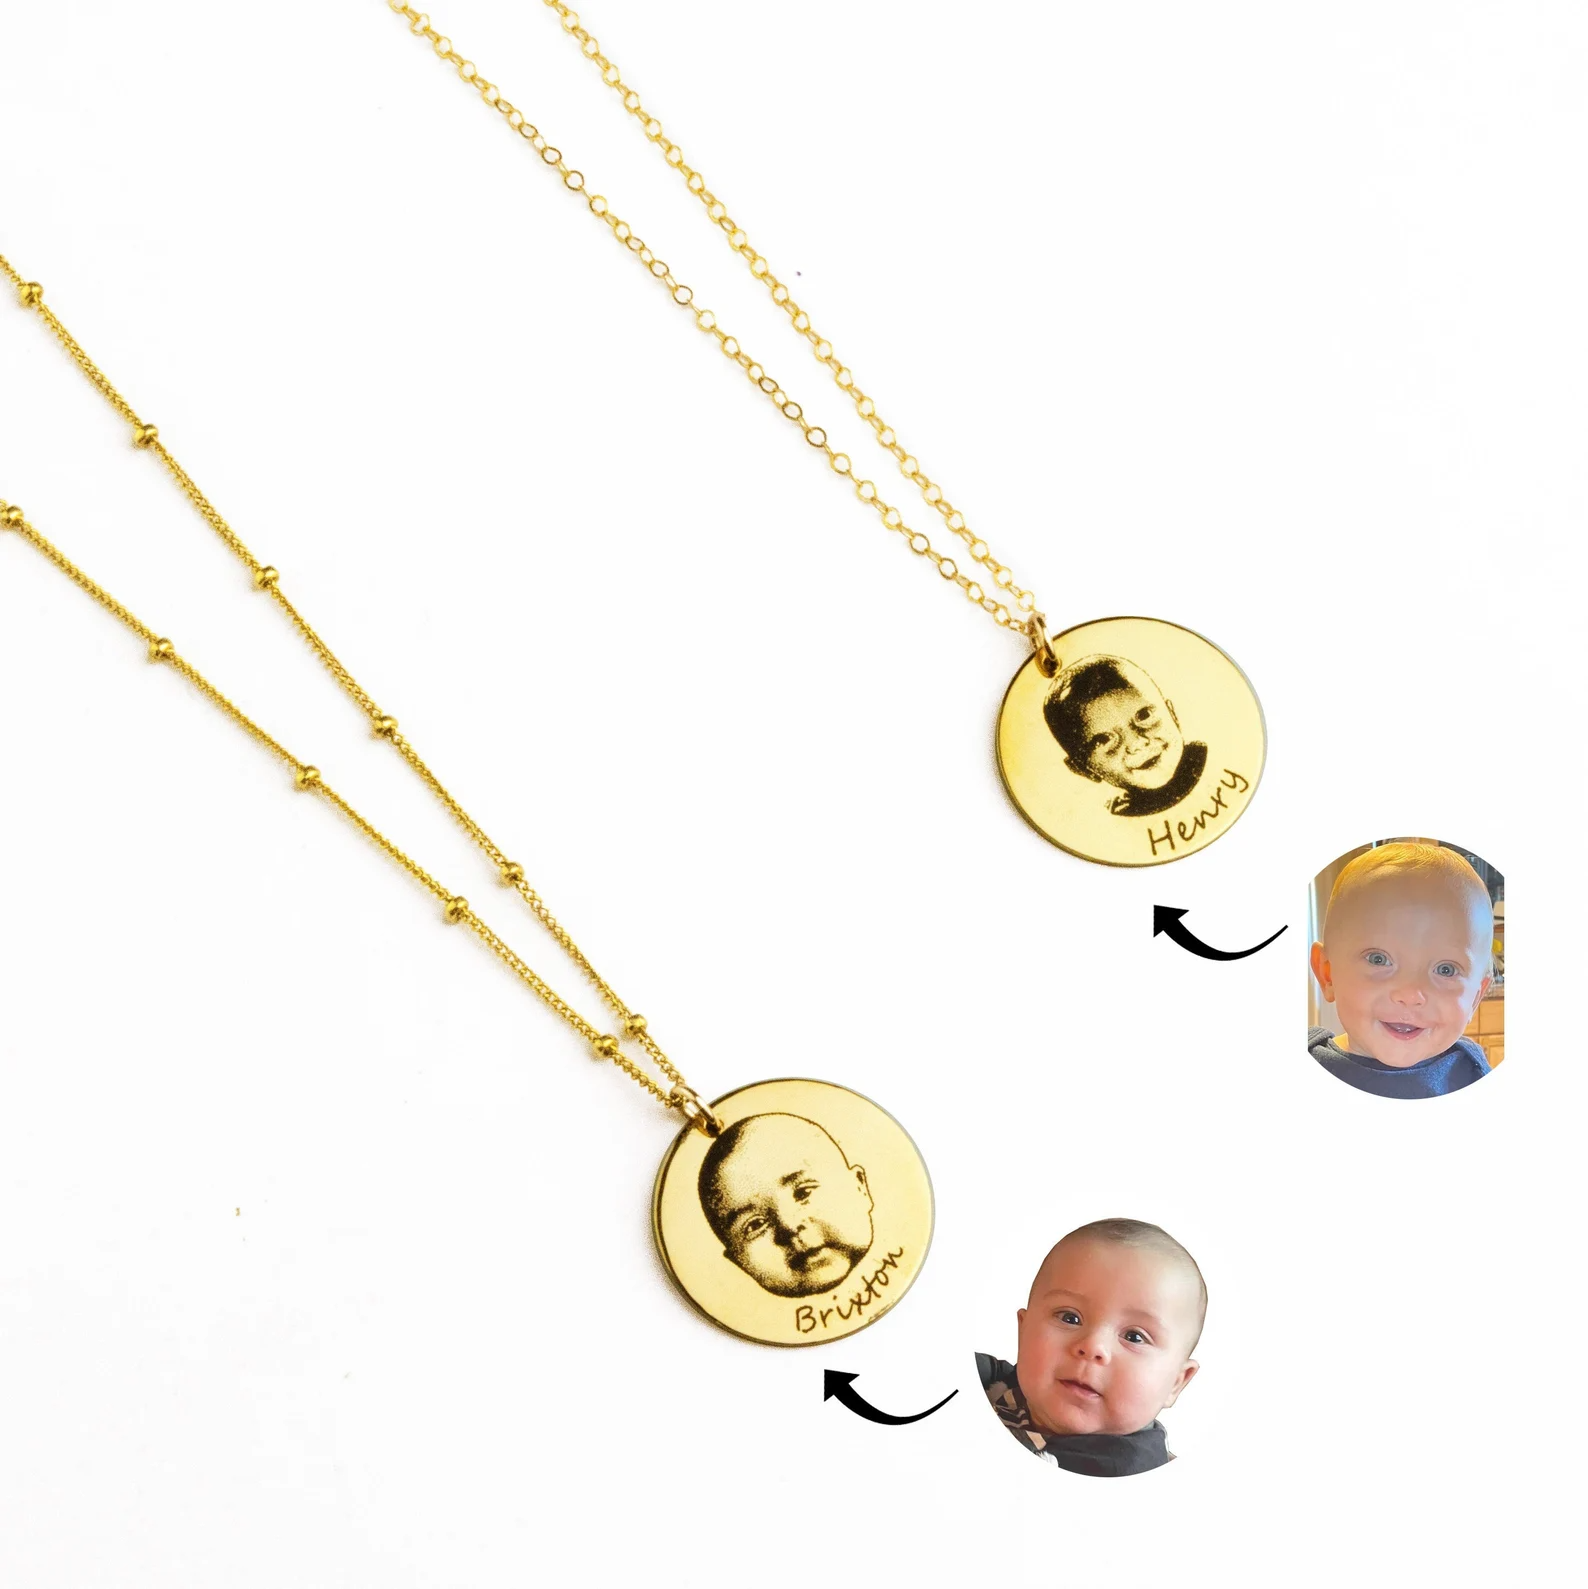 OLD) 14K Gold Initial Charm Bracelet (Design Your Own Baby/Children's  Classic Link Bracelet with Initial Charm) - 14K Gold